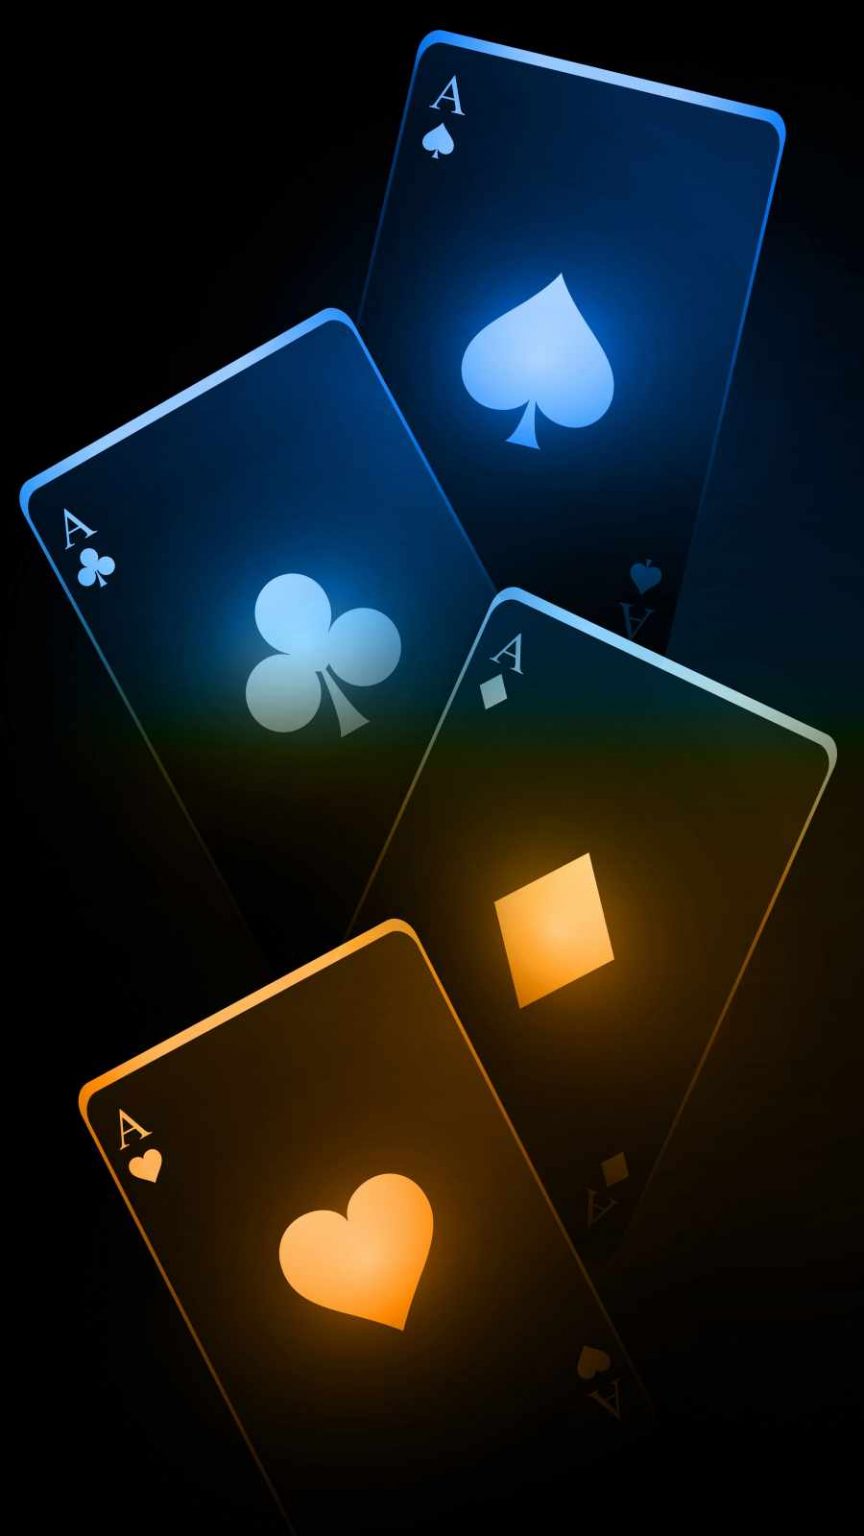 NJ Party Poker for iphone download